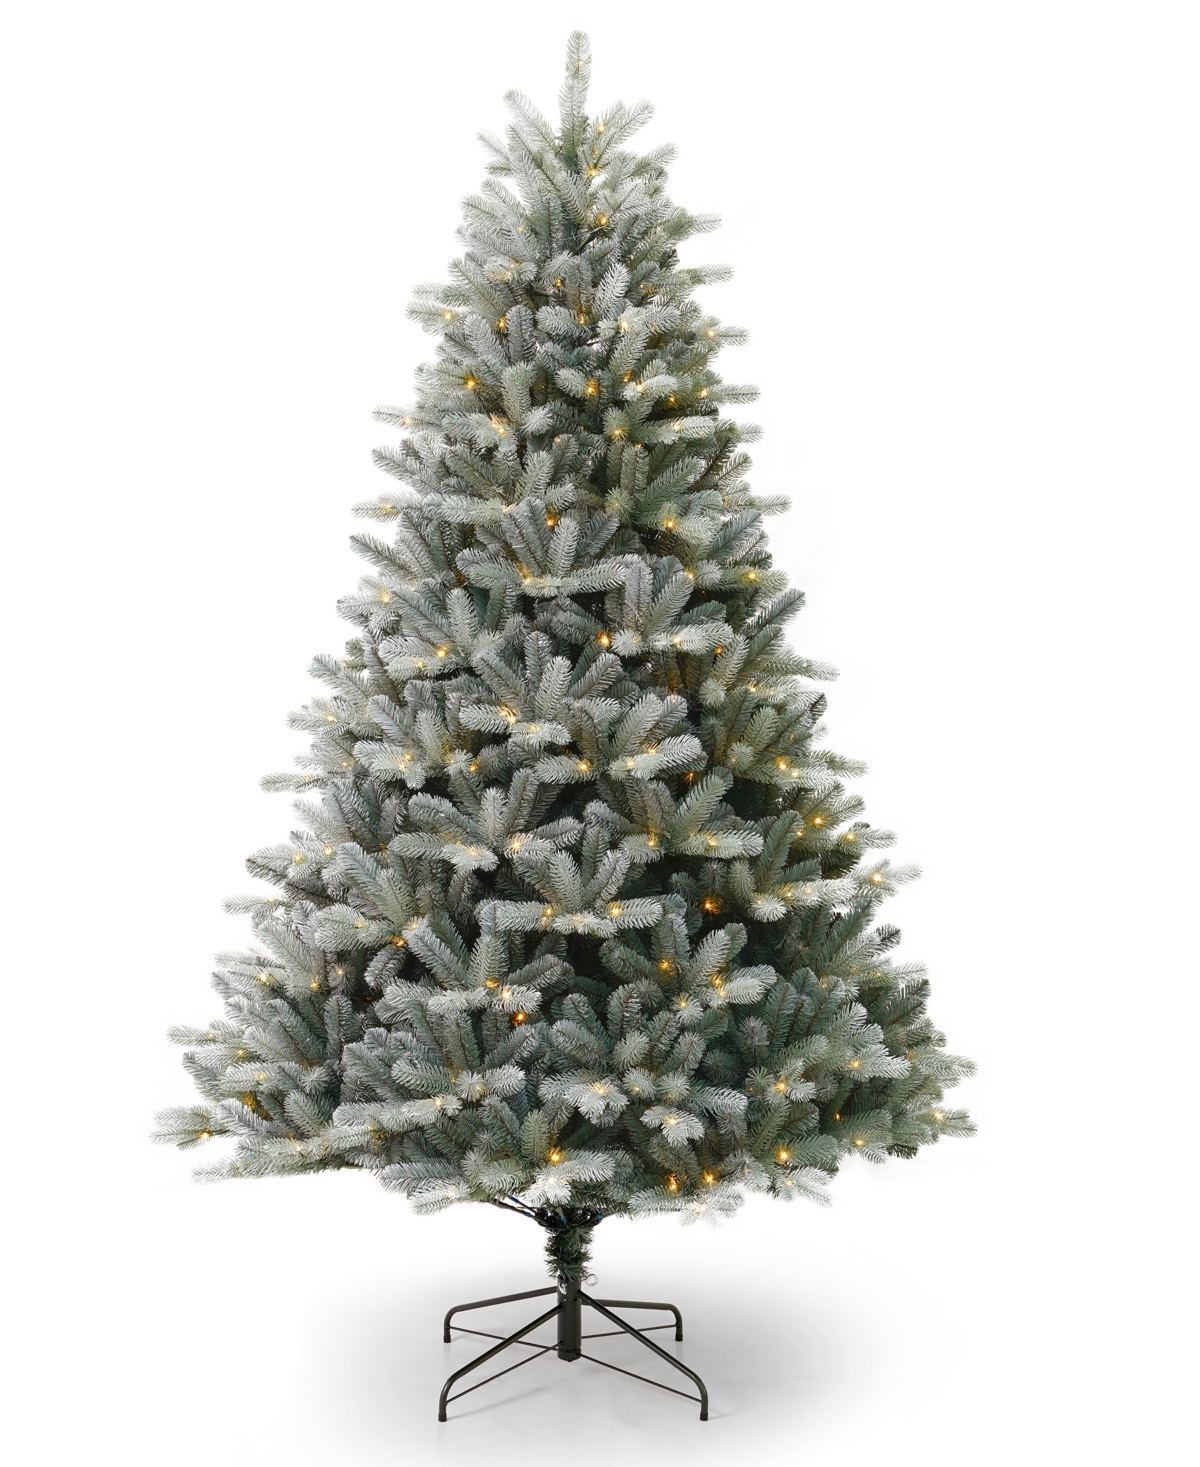 Spruce 7.5' Pre-Lit Pe Mixed Pvc Tree with Metal Standing, 2450 Tips, 500 Warm Led, Ez-Connect, Remote, Storage Bag - Green